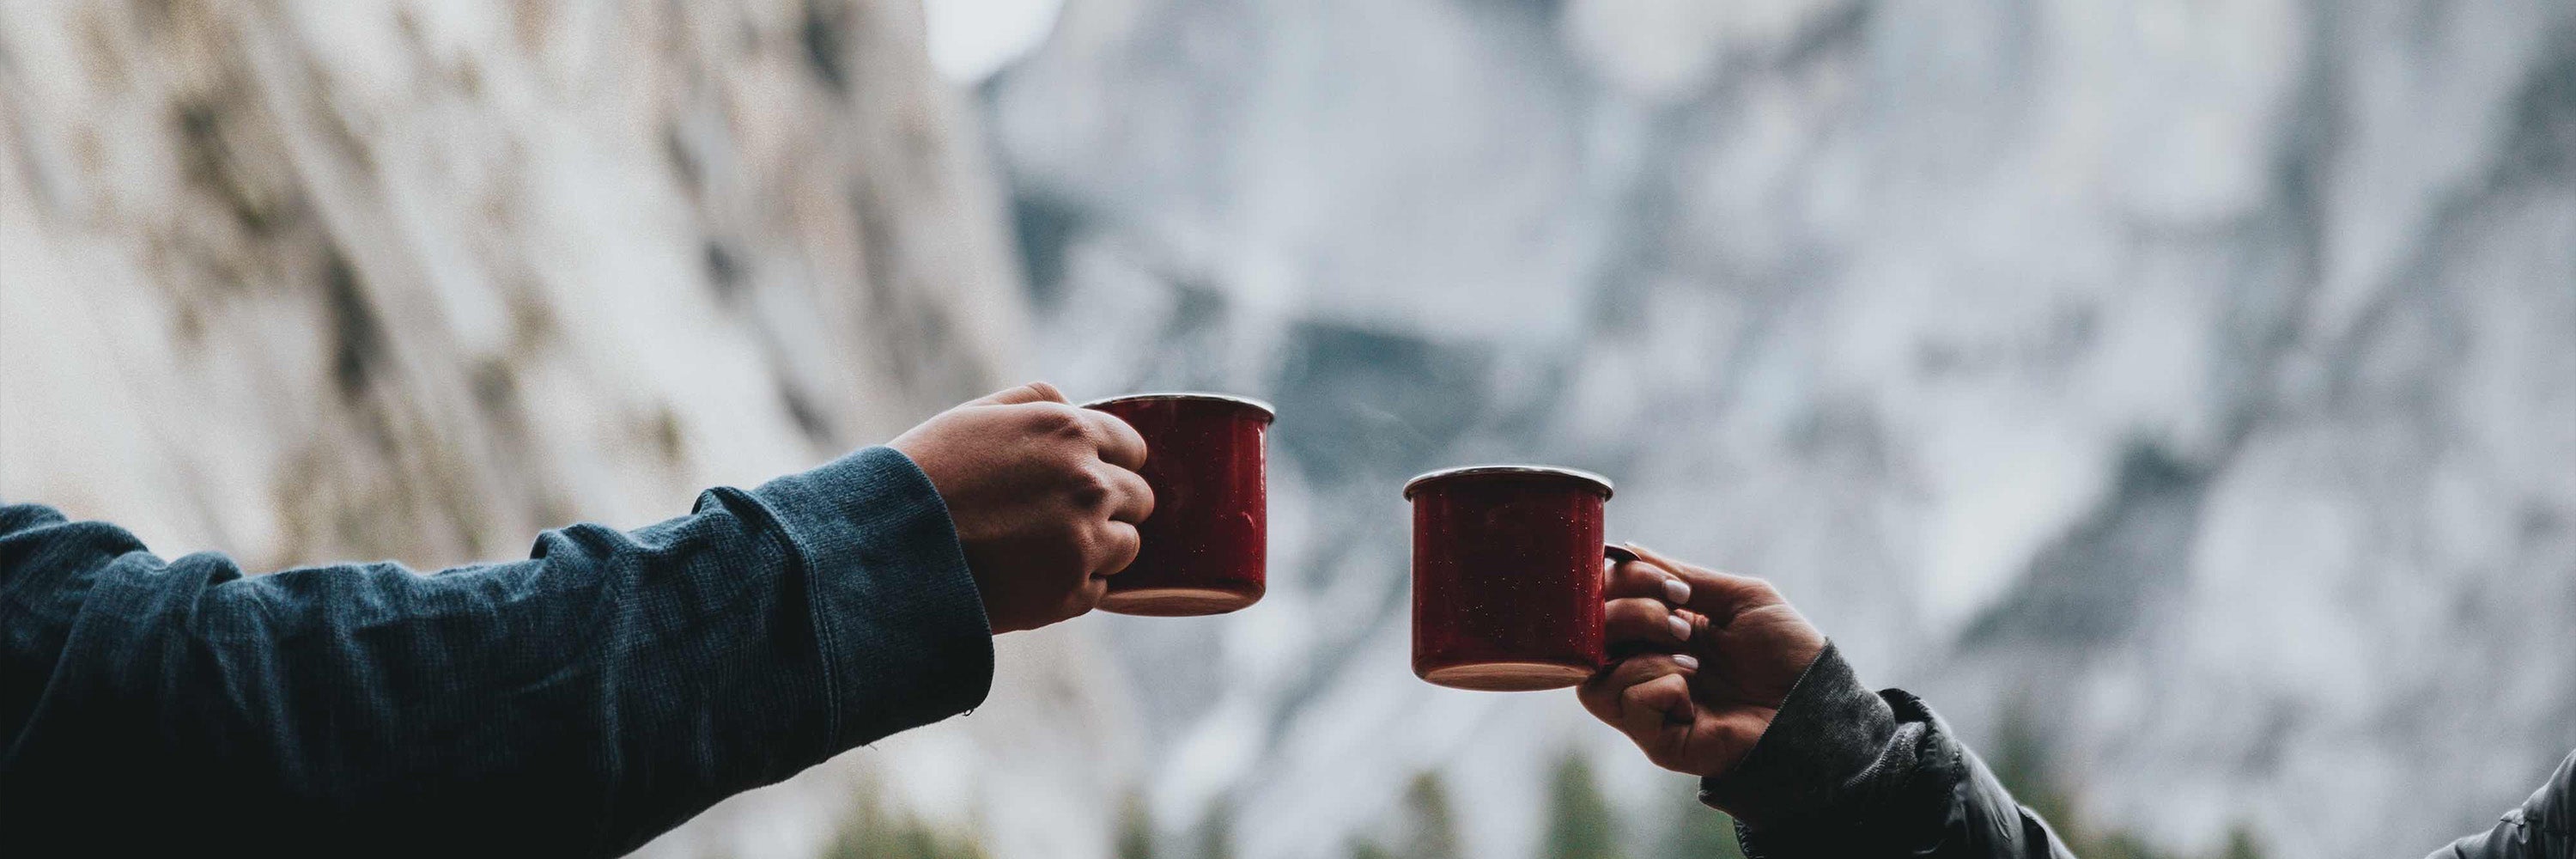 Wide image of two hands holding coffee mugs in front of a mountain range.